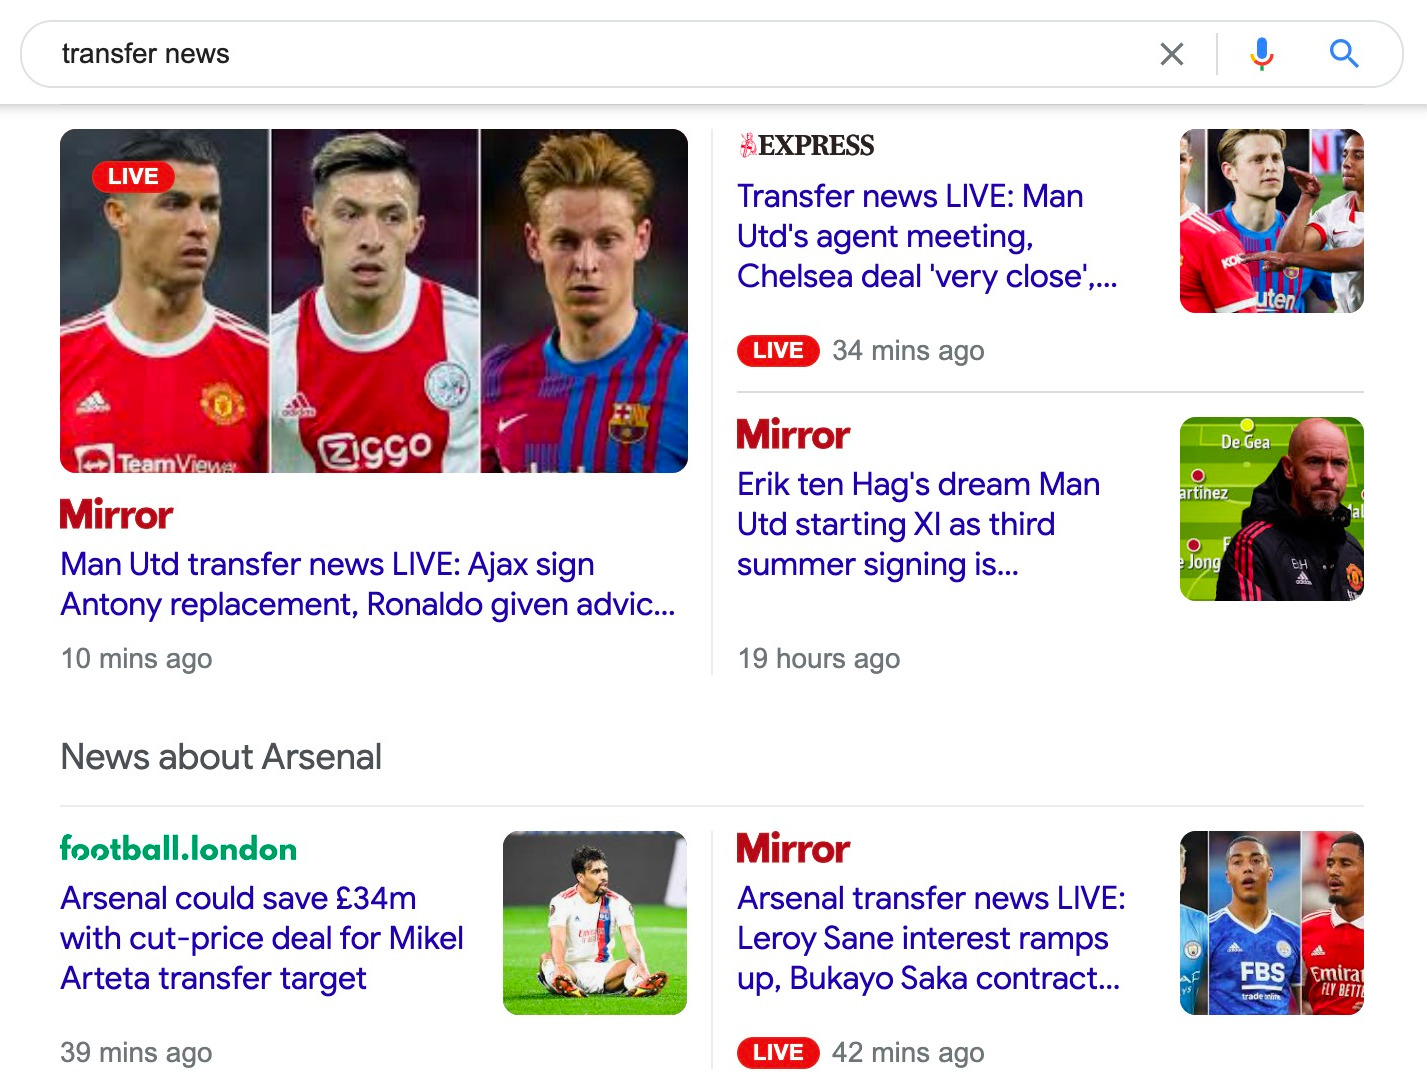 Google SERP for the query, "transfer news"